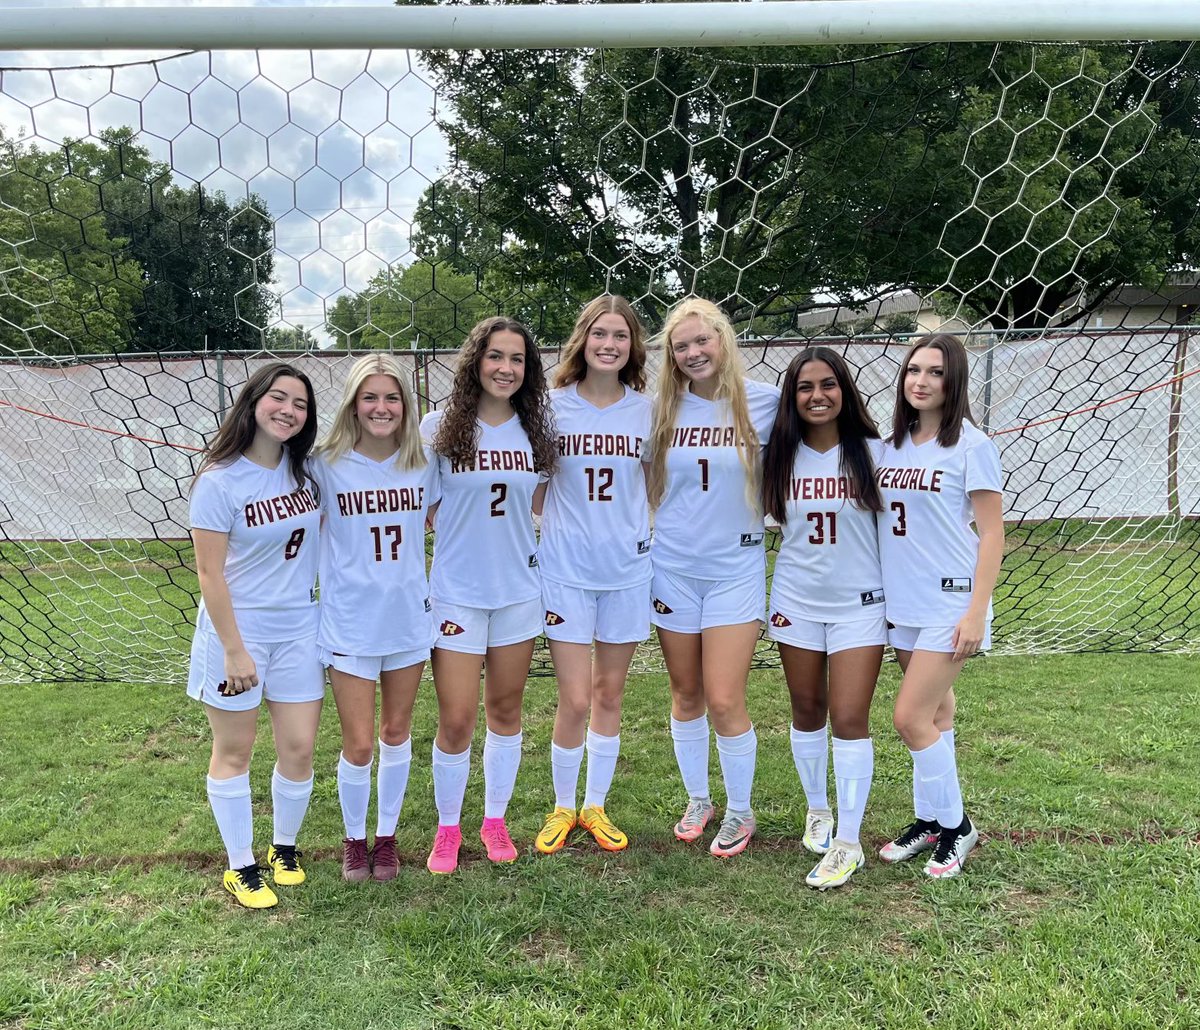 Tonight we play Blackman and celebrate our seniors! These four years have went by way to fast!! Josie,Hannah,Reagan,Ariana,Mariam and Annalea. We love you ladies and thank you for your dedication and commitment to the Lady Warriors soccer team! 🏹⚽️ #onceawarrior #alwaysawarrior